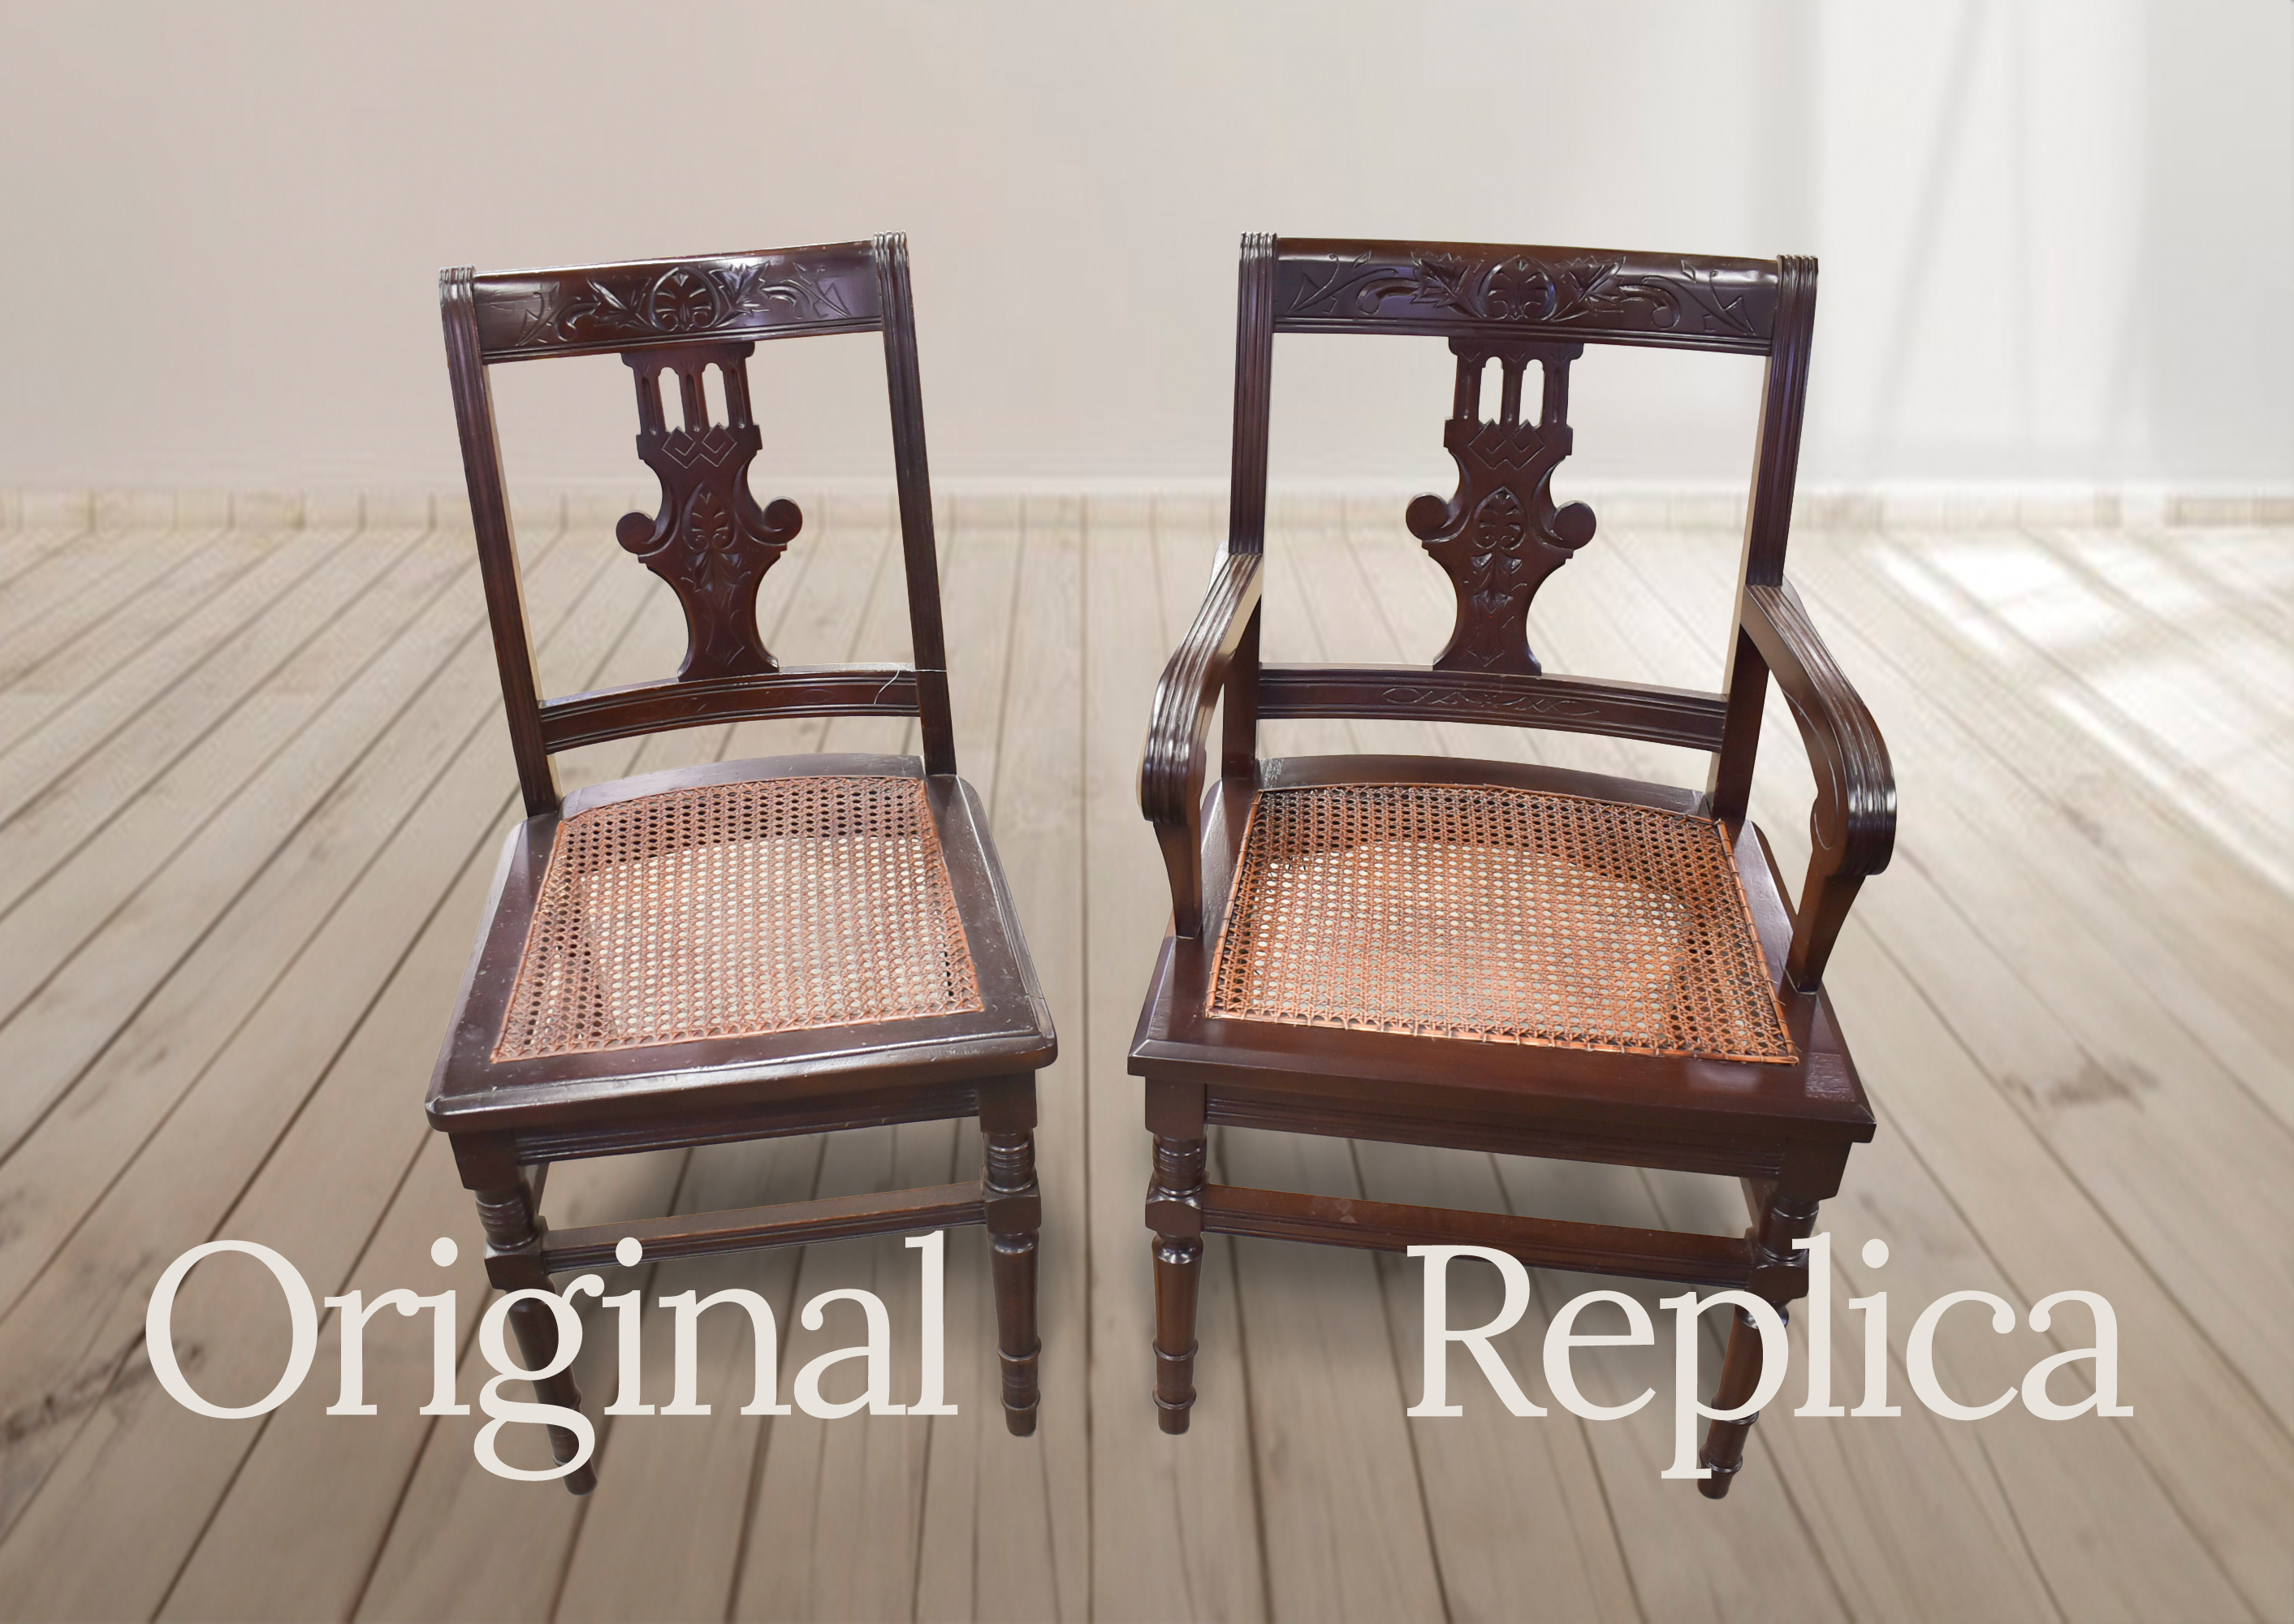 Chair w/ arms is replica of the one without